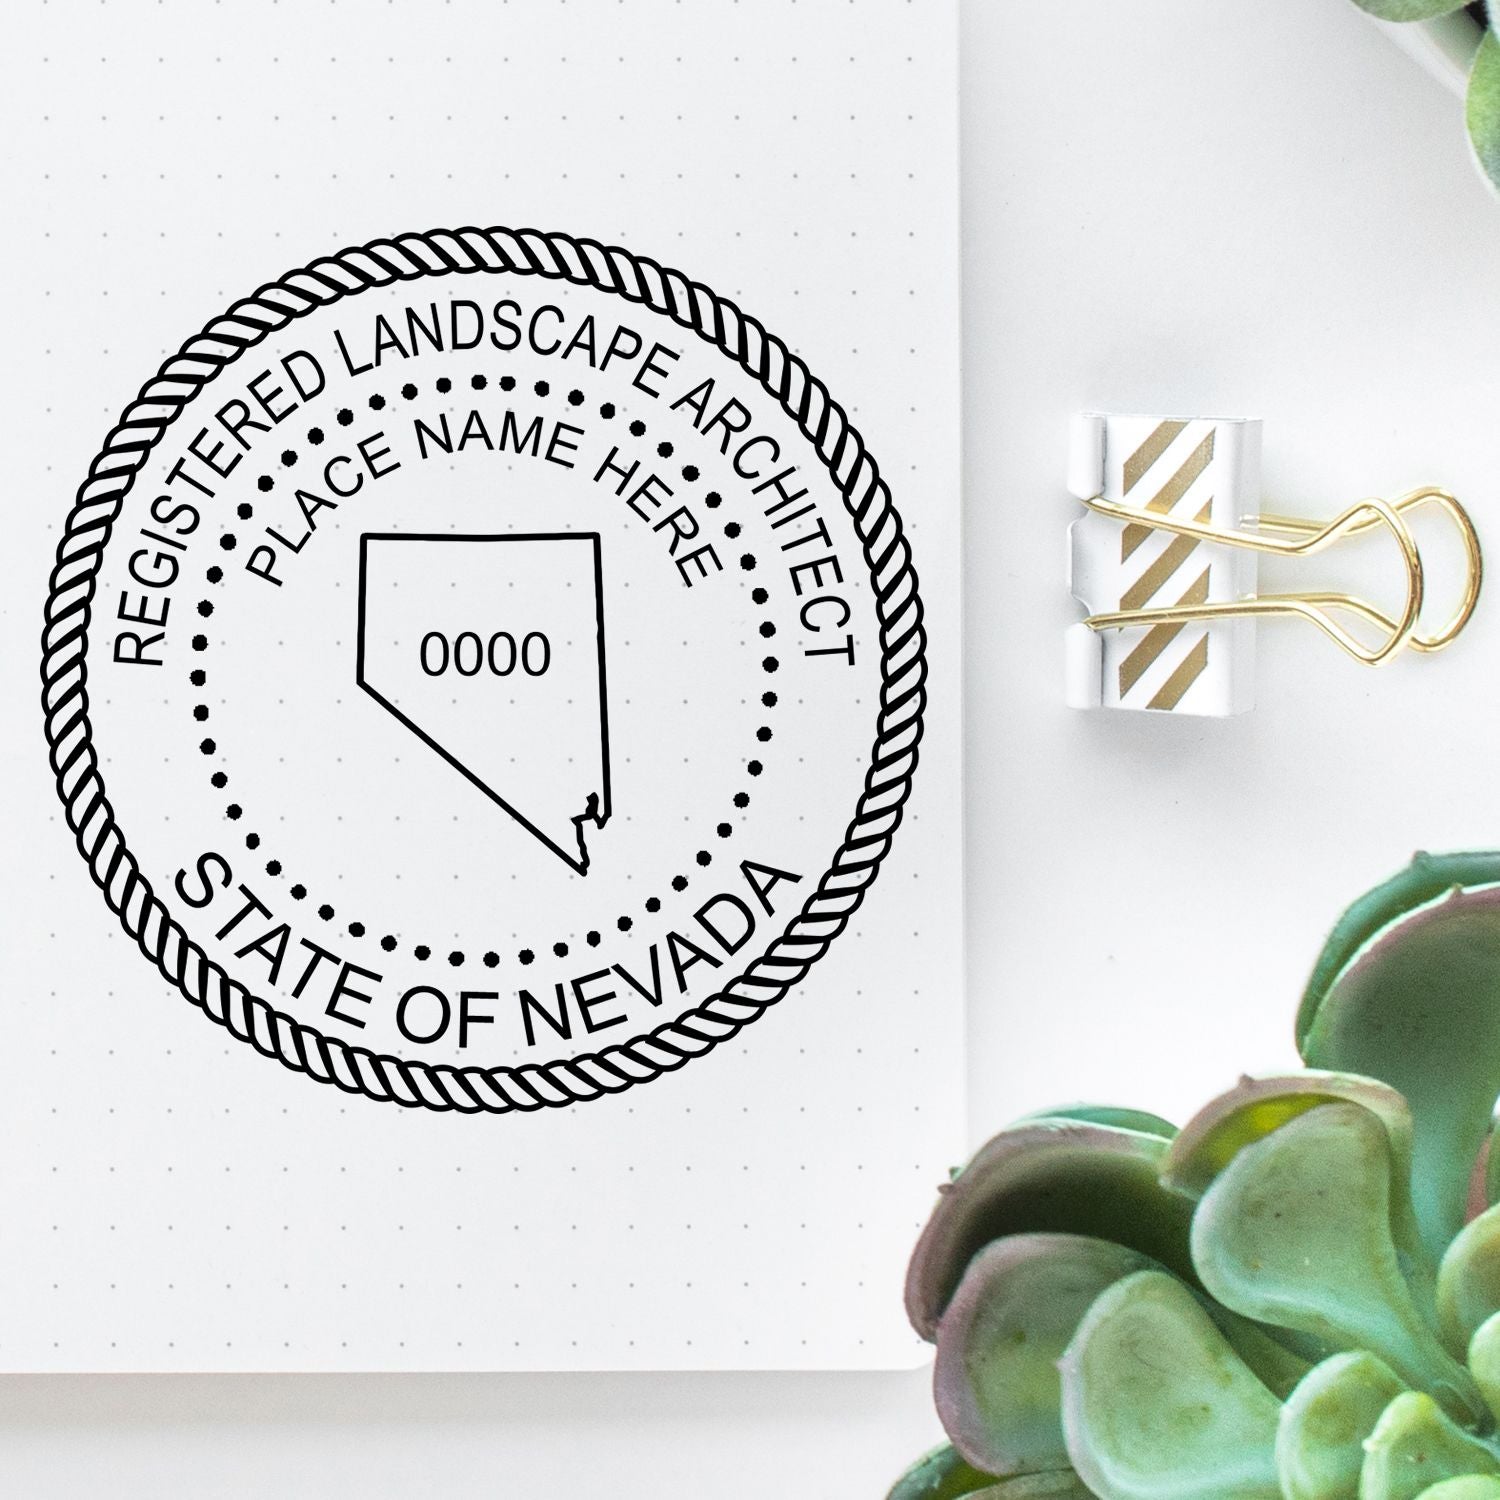 A stamped impression of the Self-Inking Nevada Landscape Architect Stamp in this stylish lifestyle photo, setting the tone for a unique and personalized product.